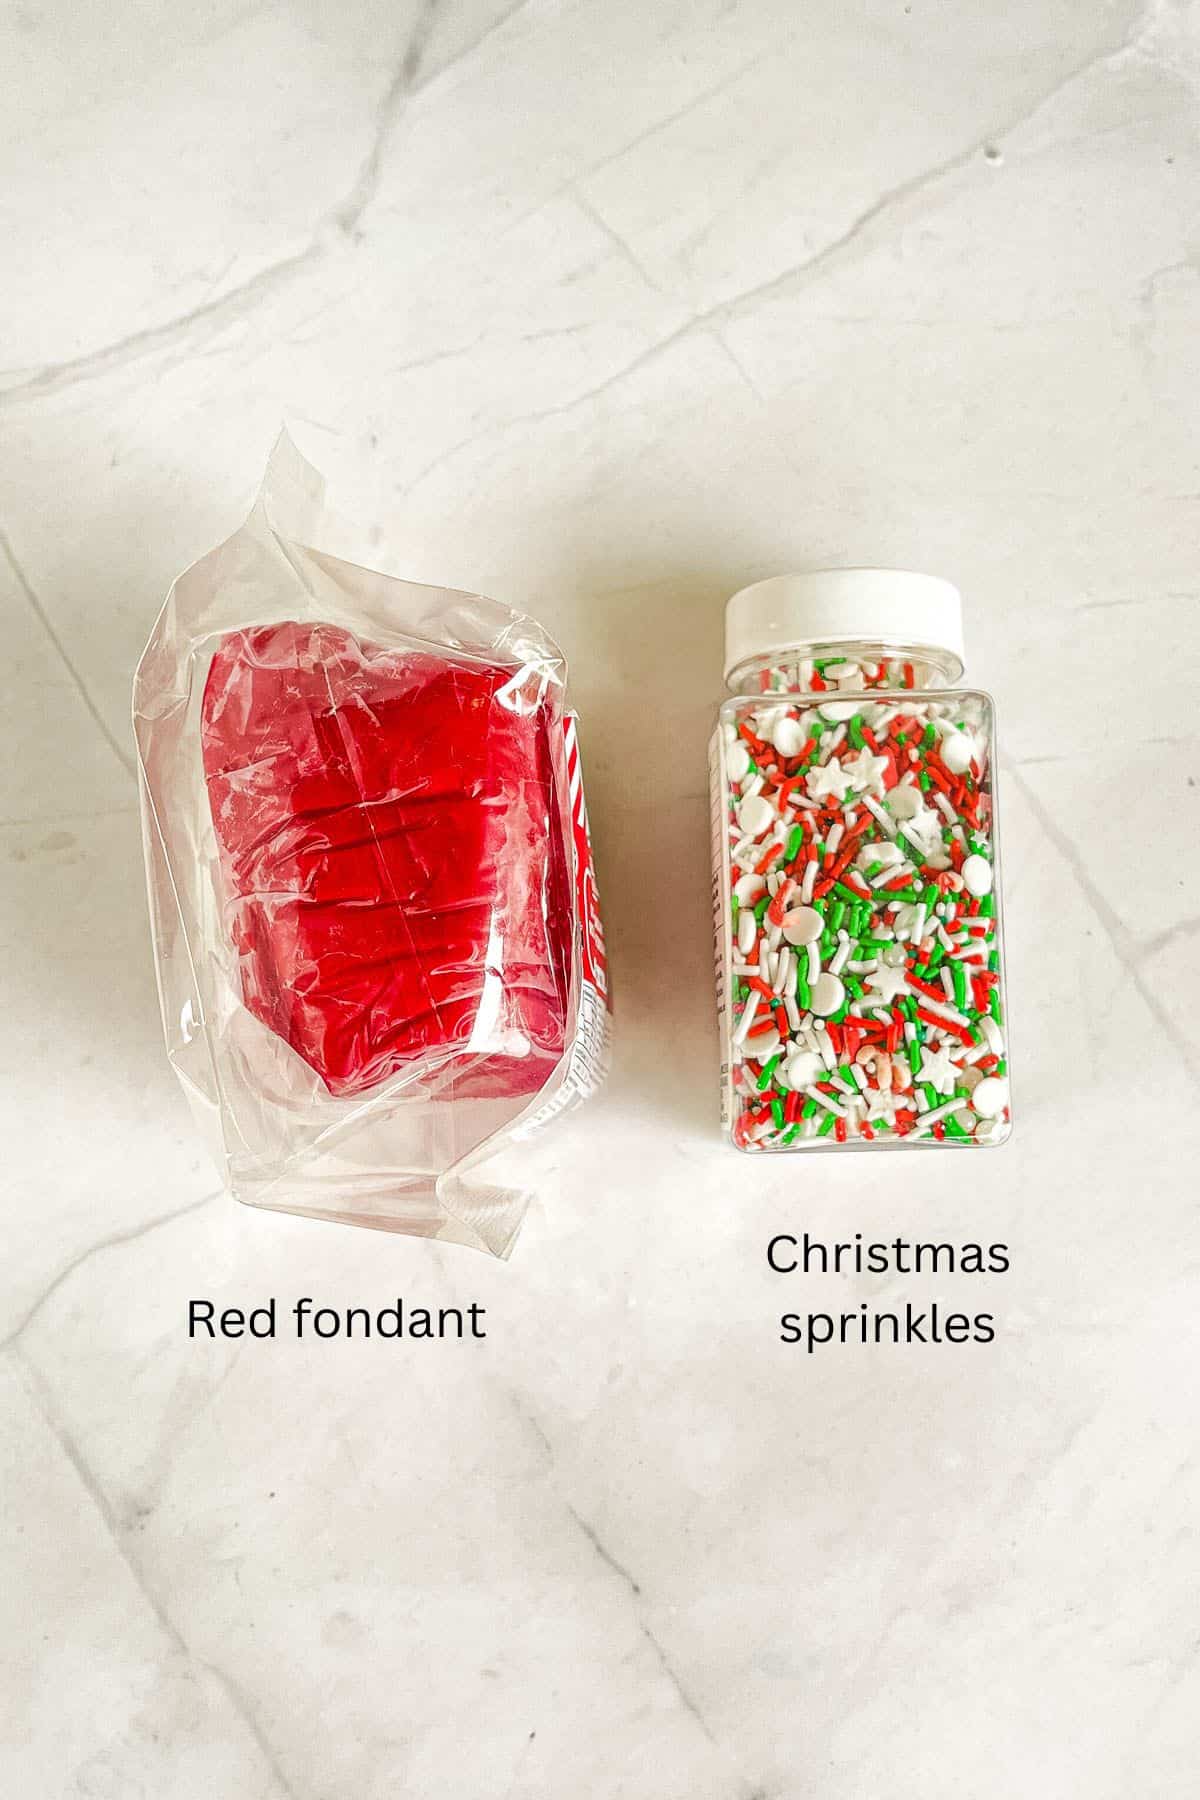 Red fondant and a bottle of red, green and white sprinkles.